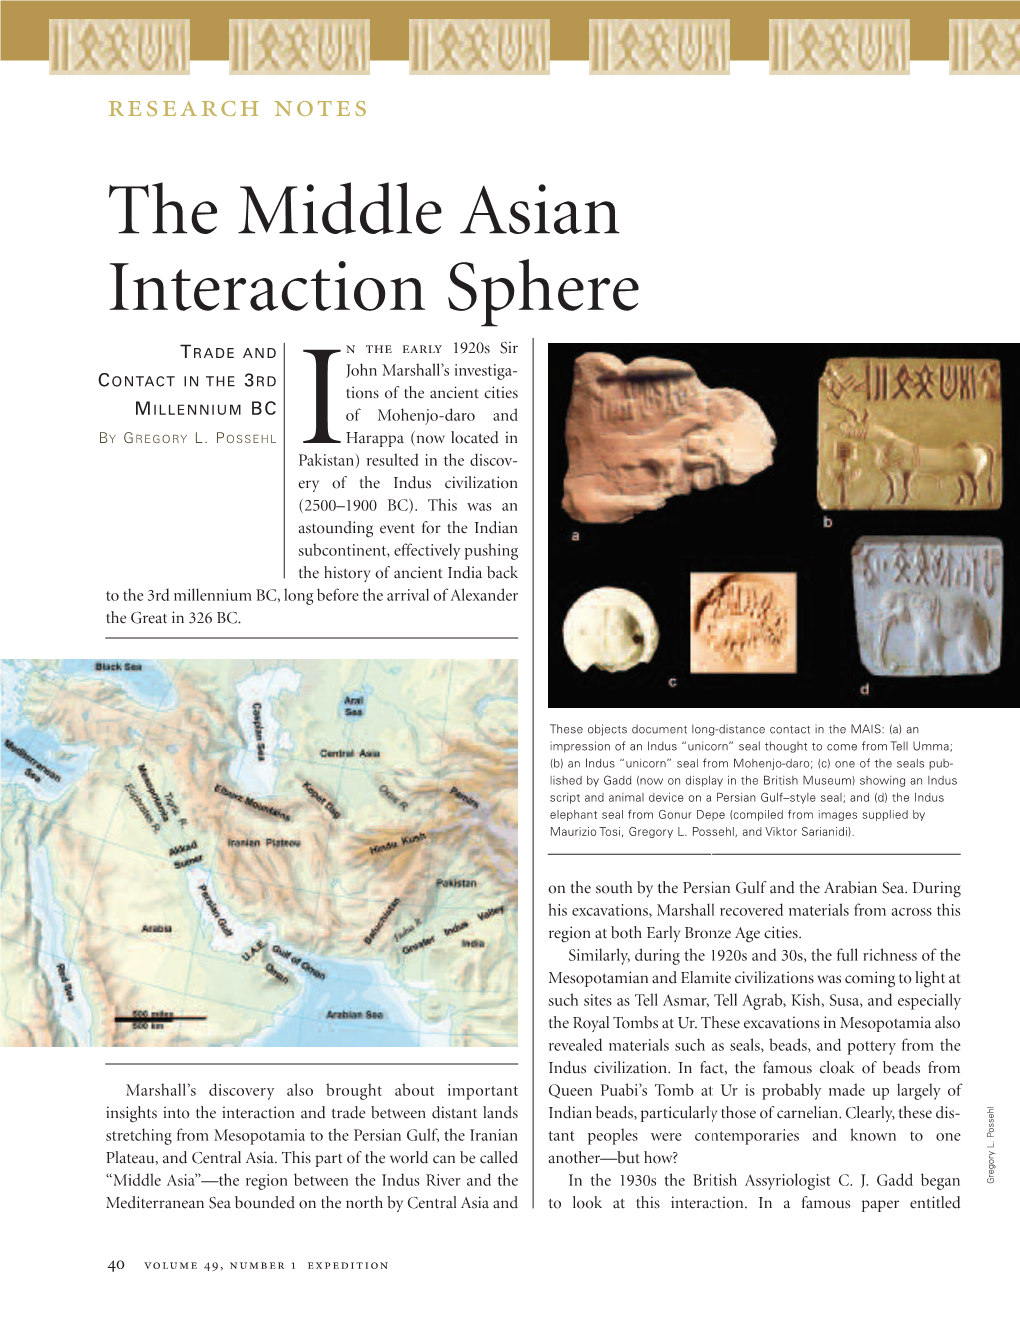 The Middle Asian Interaction Sphere